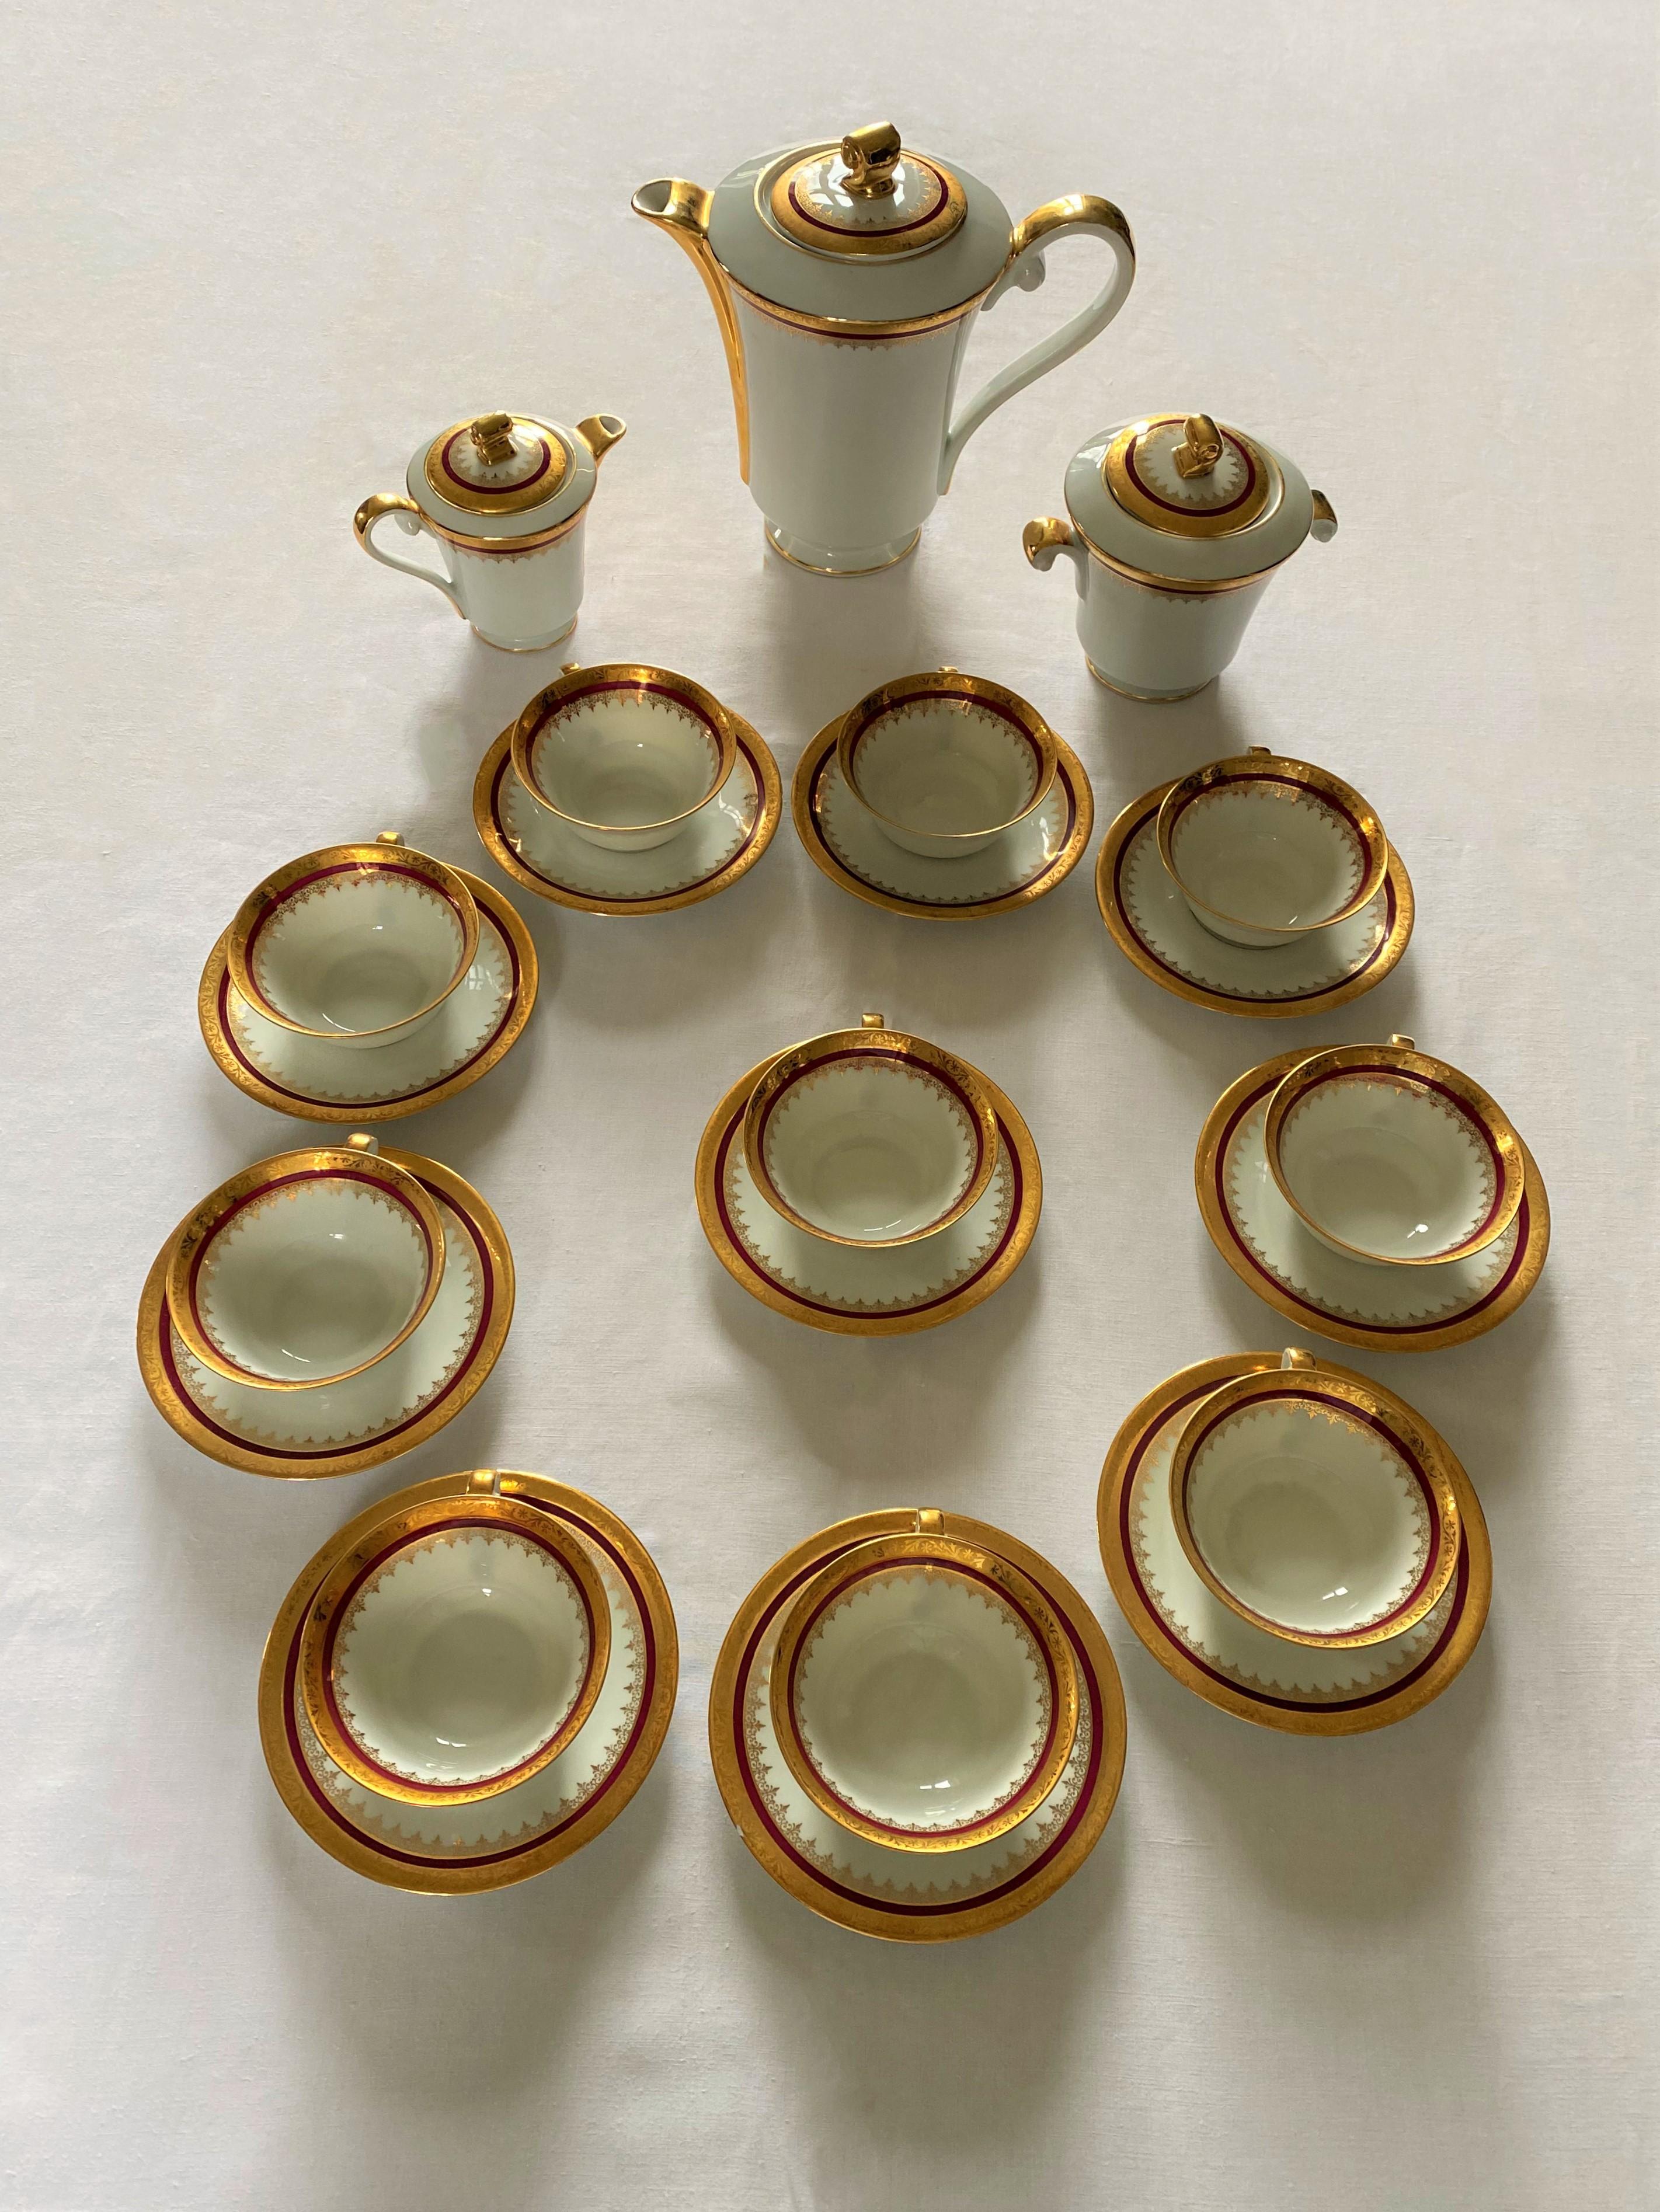 Elegant coffee service of empire style of the beginning of the 19th century. Made of Limoges porcelain, the service is composed of 10 cups, 10 saucers, a coffee pot, a milk jug and a sugar bowl. 
The set is nicely decorated with gold and red